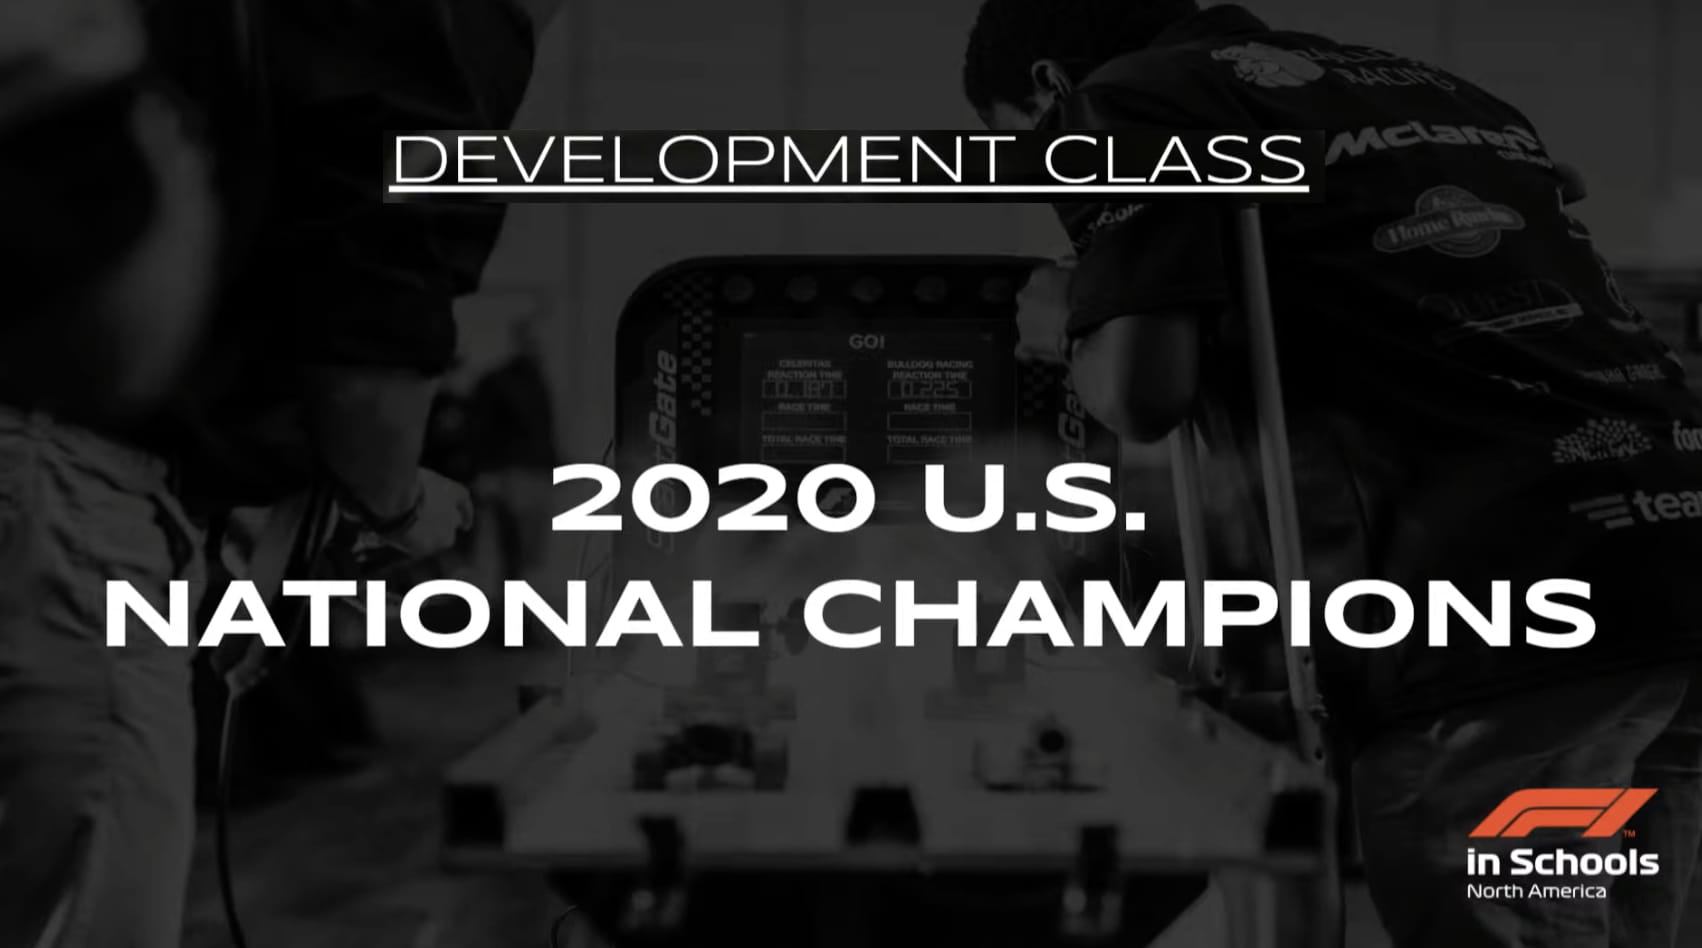 8th Gear Racing is the F1 in Schools Development  Class 2020 National Champions-8th-gear-racing-is-the-f1-in-schools-development-class-2020-national-champions-Screen Shot 20201205 at 5_48_47 PM